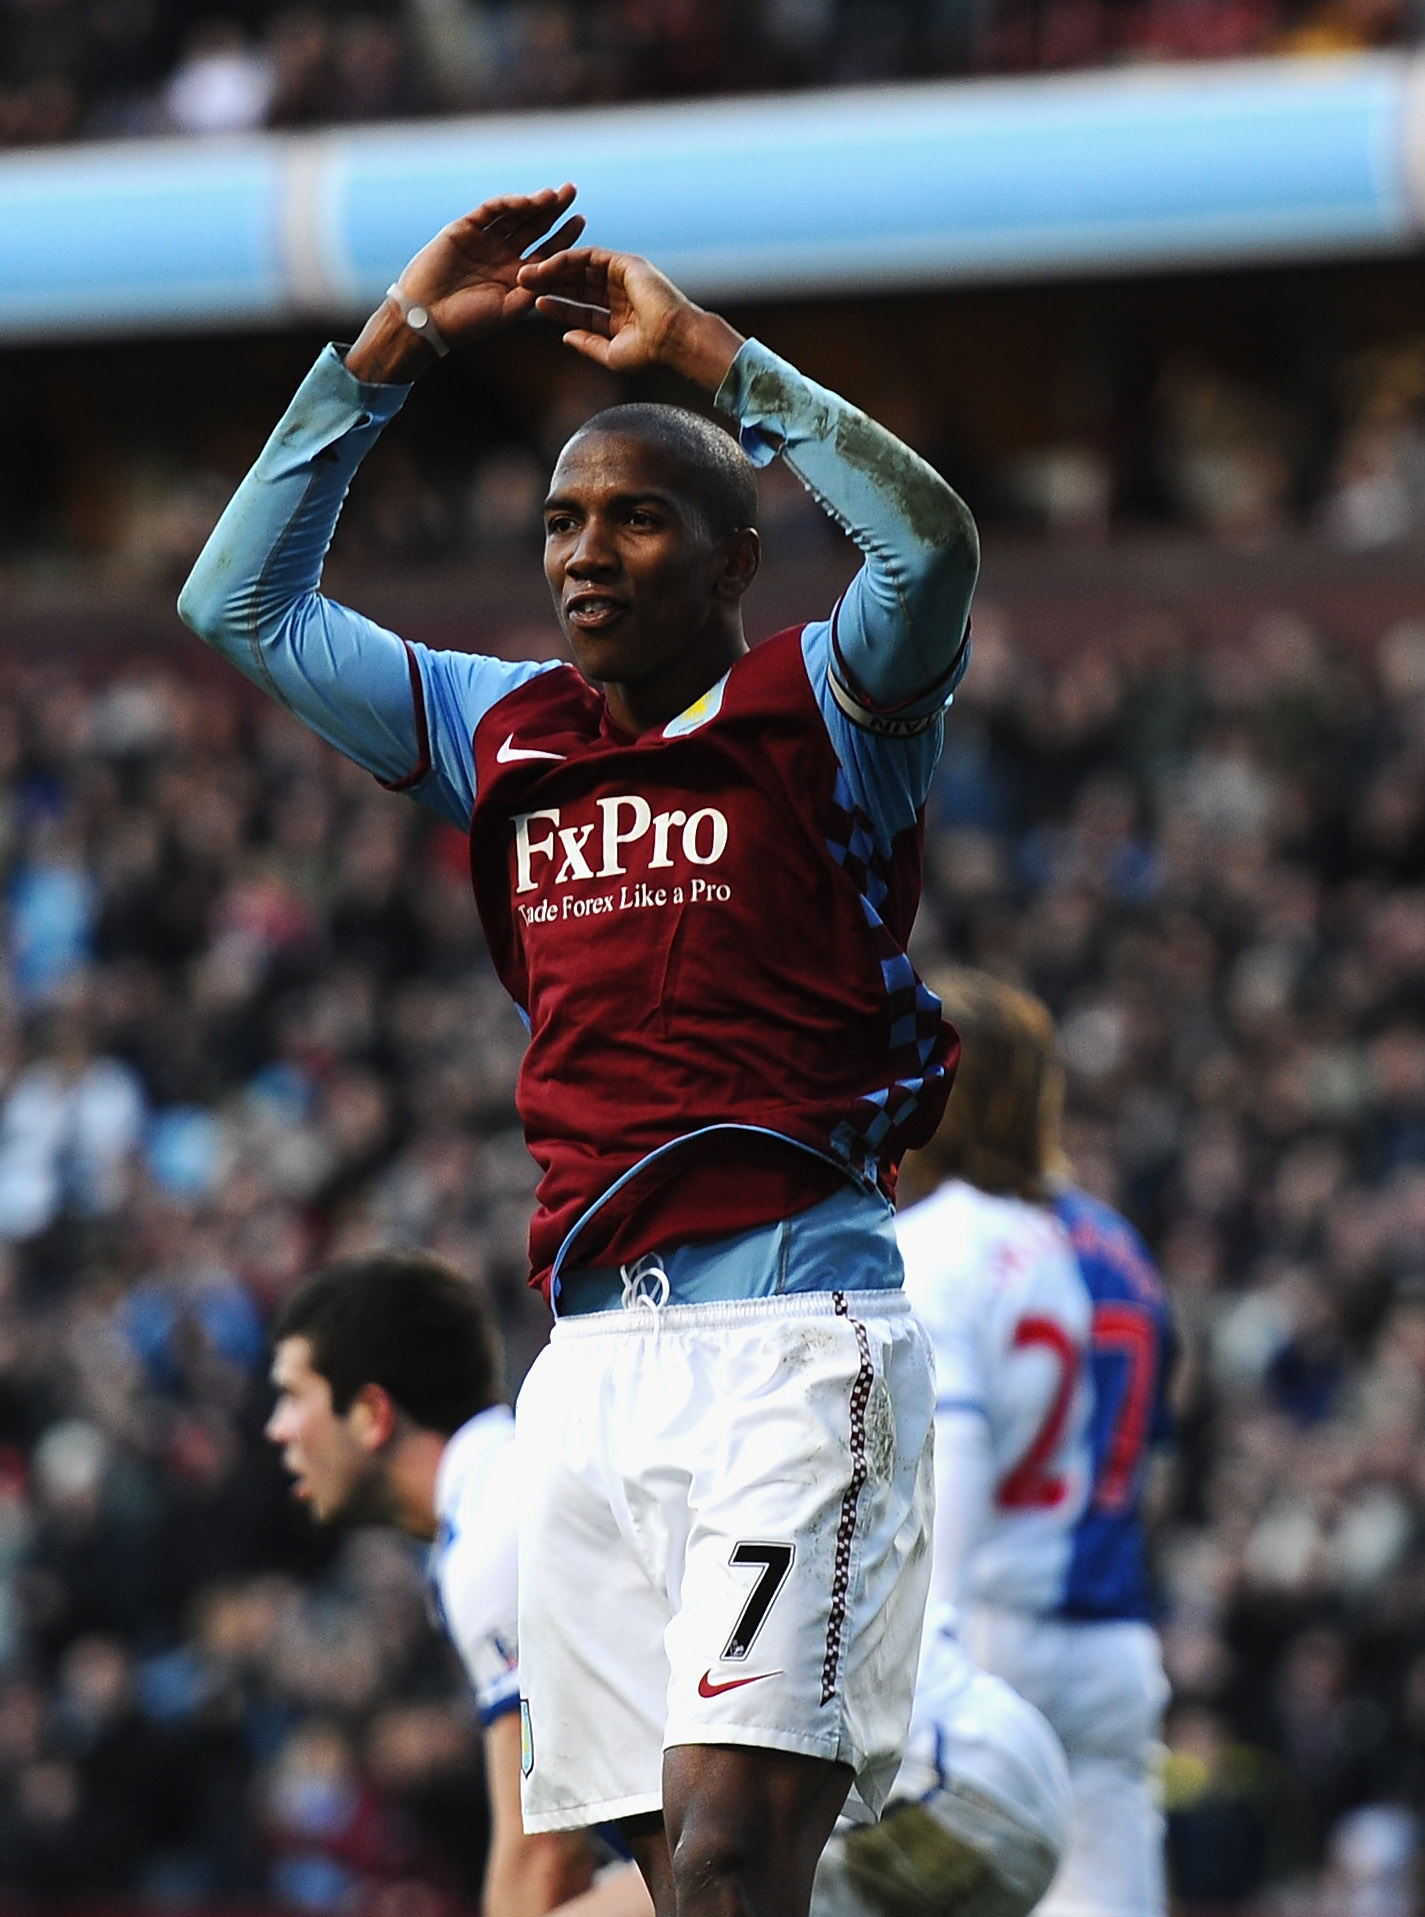 BIRMINGHAM, ENGLAND - FEBRUARY 26:  Ashley Young of Aston Villa celebrates his second goal during the Barclays Premier League match between Aston Villa and Blackburn Rovers at Villa Park on February 26, 2011 in Birmingham, England.  (Photo by Laurence Gri